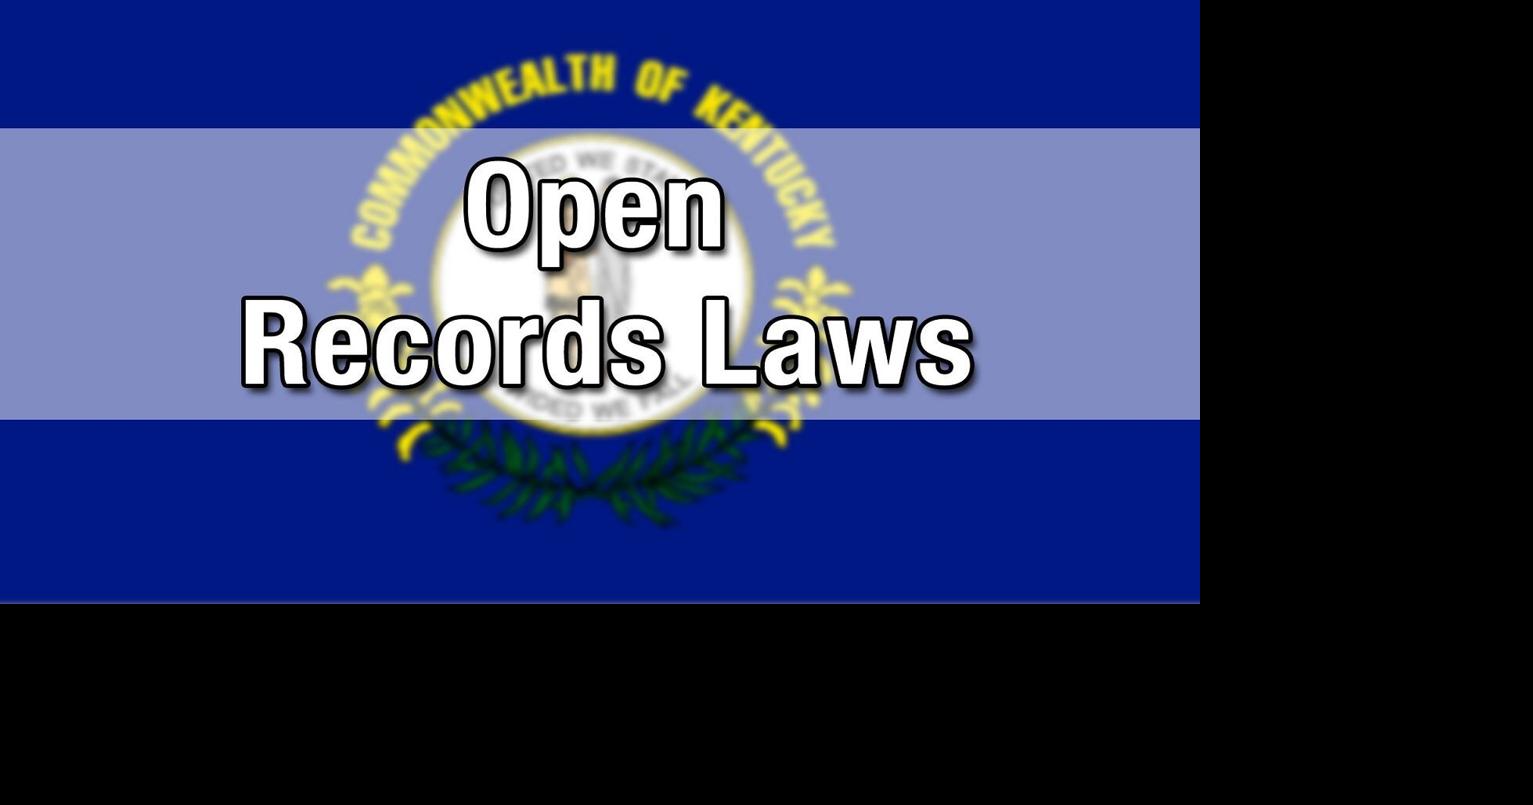 Kentucky Open Government Coalition weighs in on Murray State University open records request denial